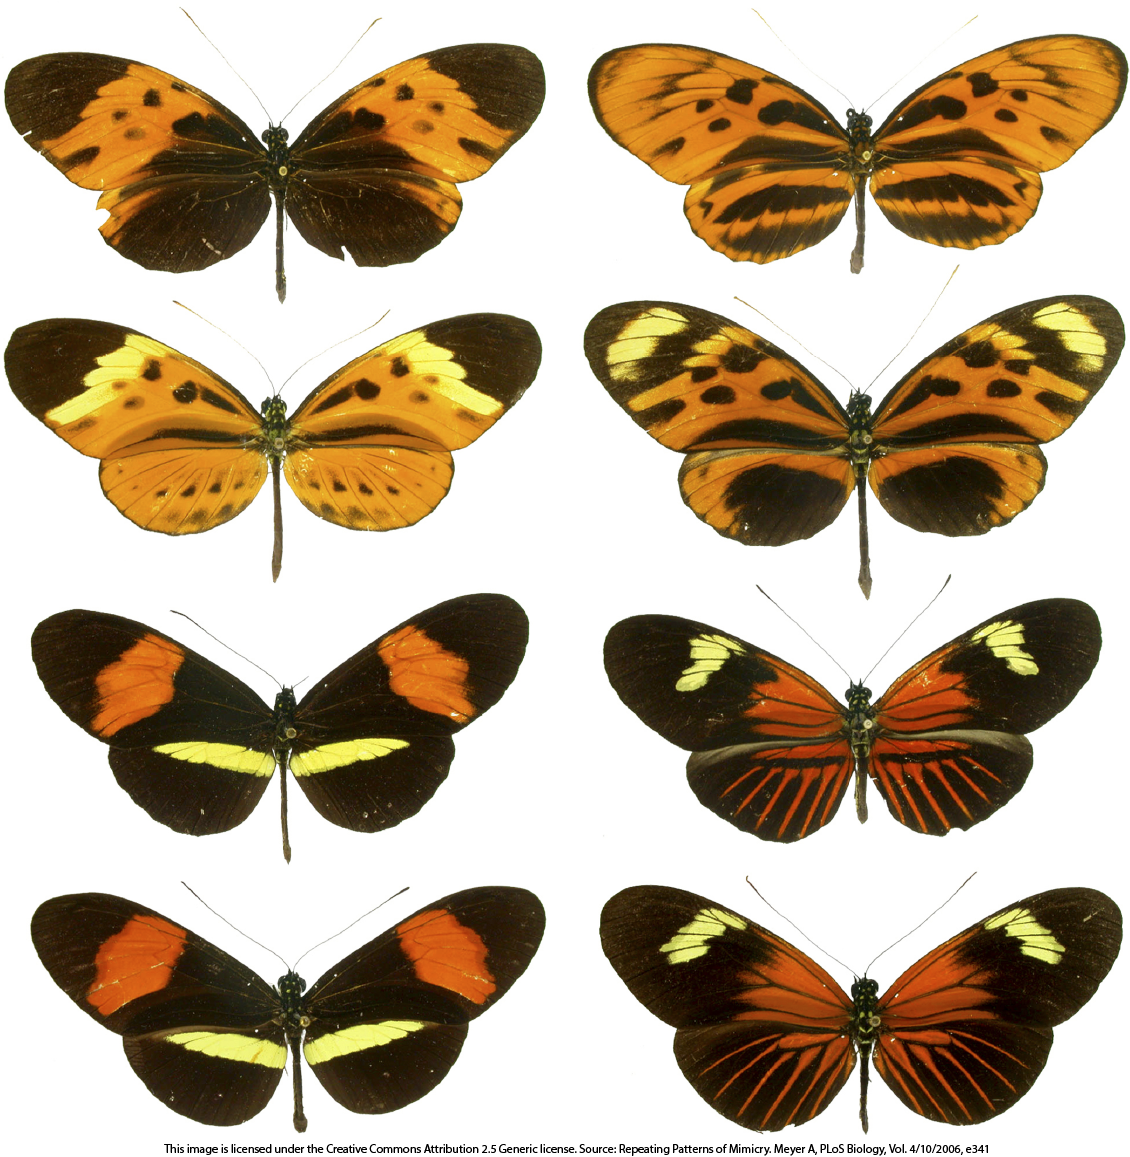 six butterflies with varied patterns of stripes and spots in yellow, orange, red, and black